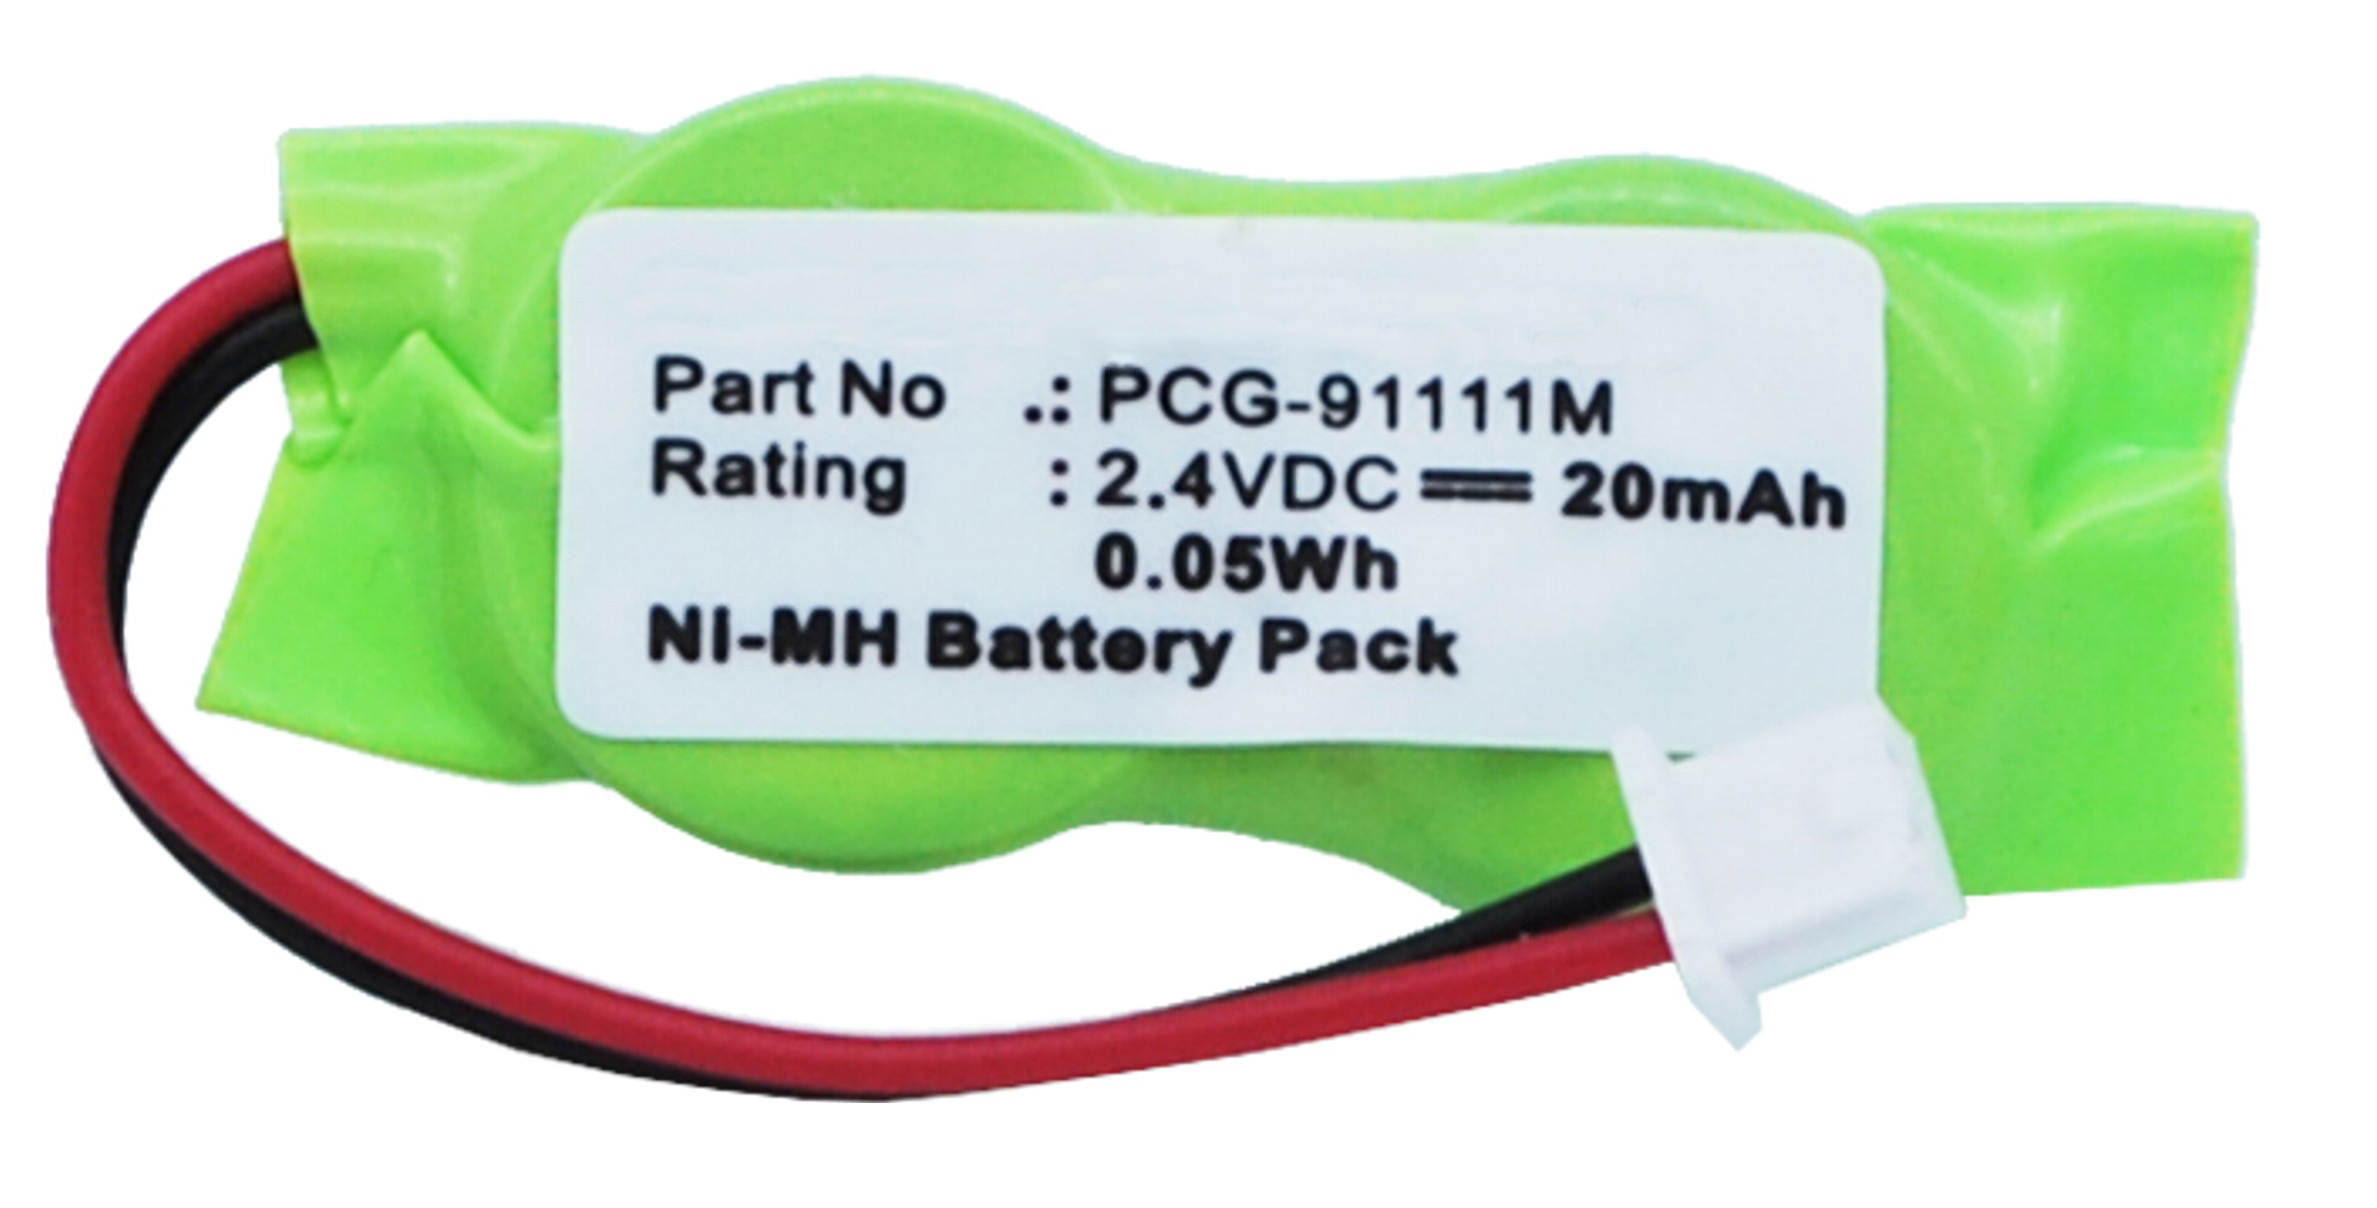 Synergy Digital Battery Compatible With Sony 2/V15H CMOS/BIOS Battery - (Ni-MH, 2.4V, 20 mAh)